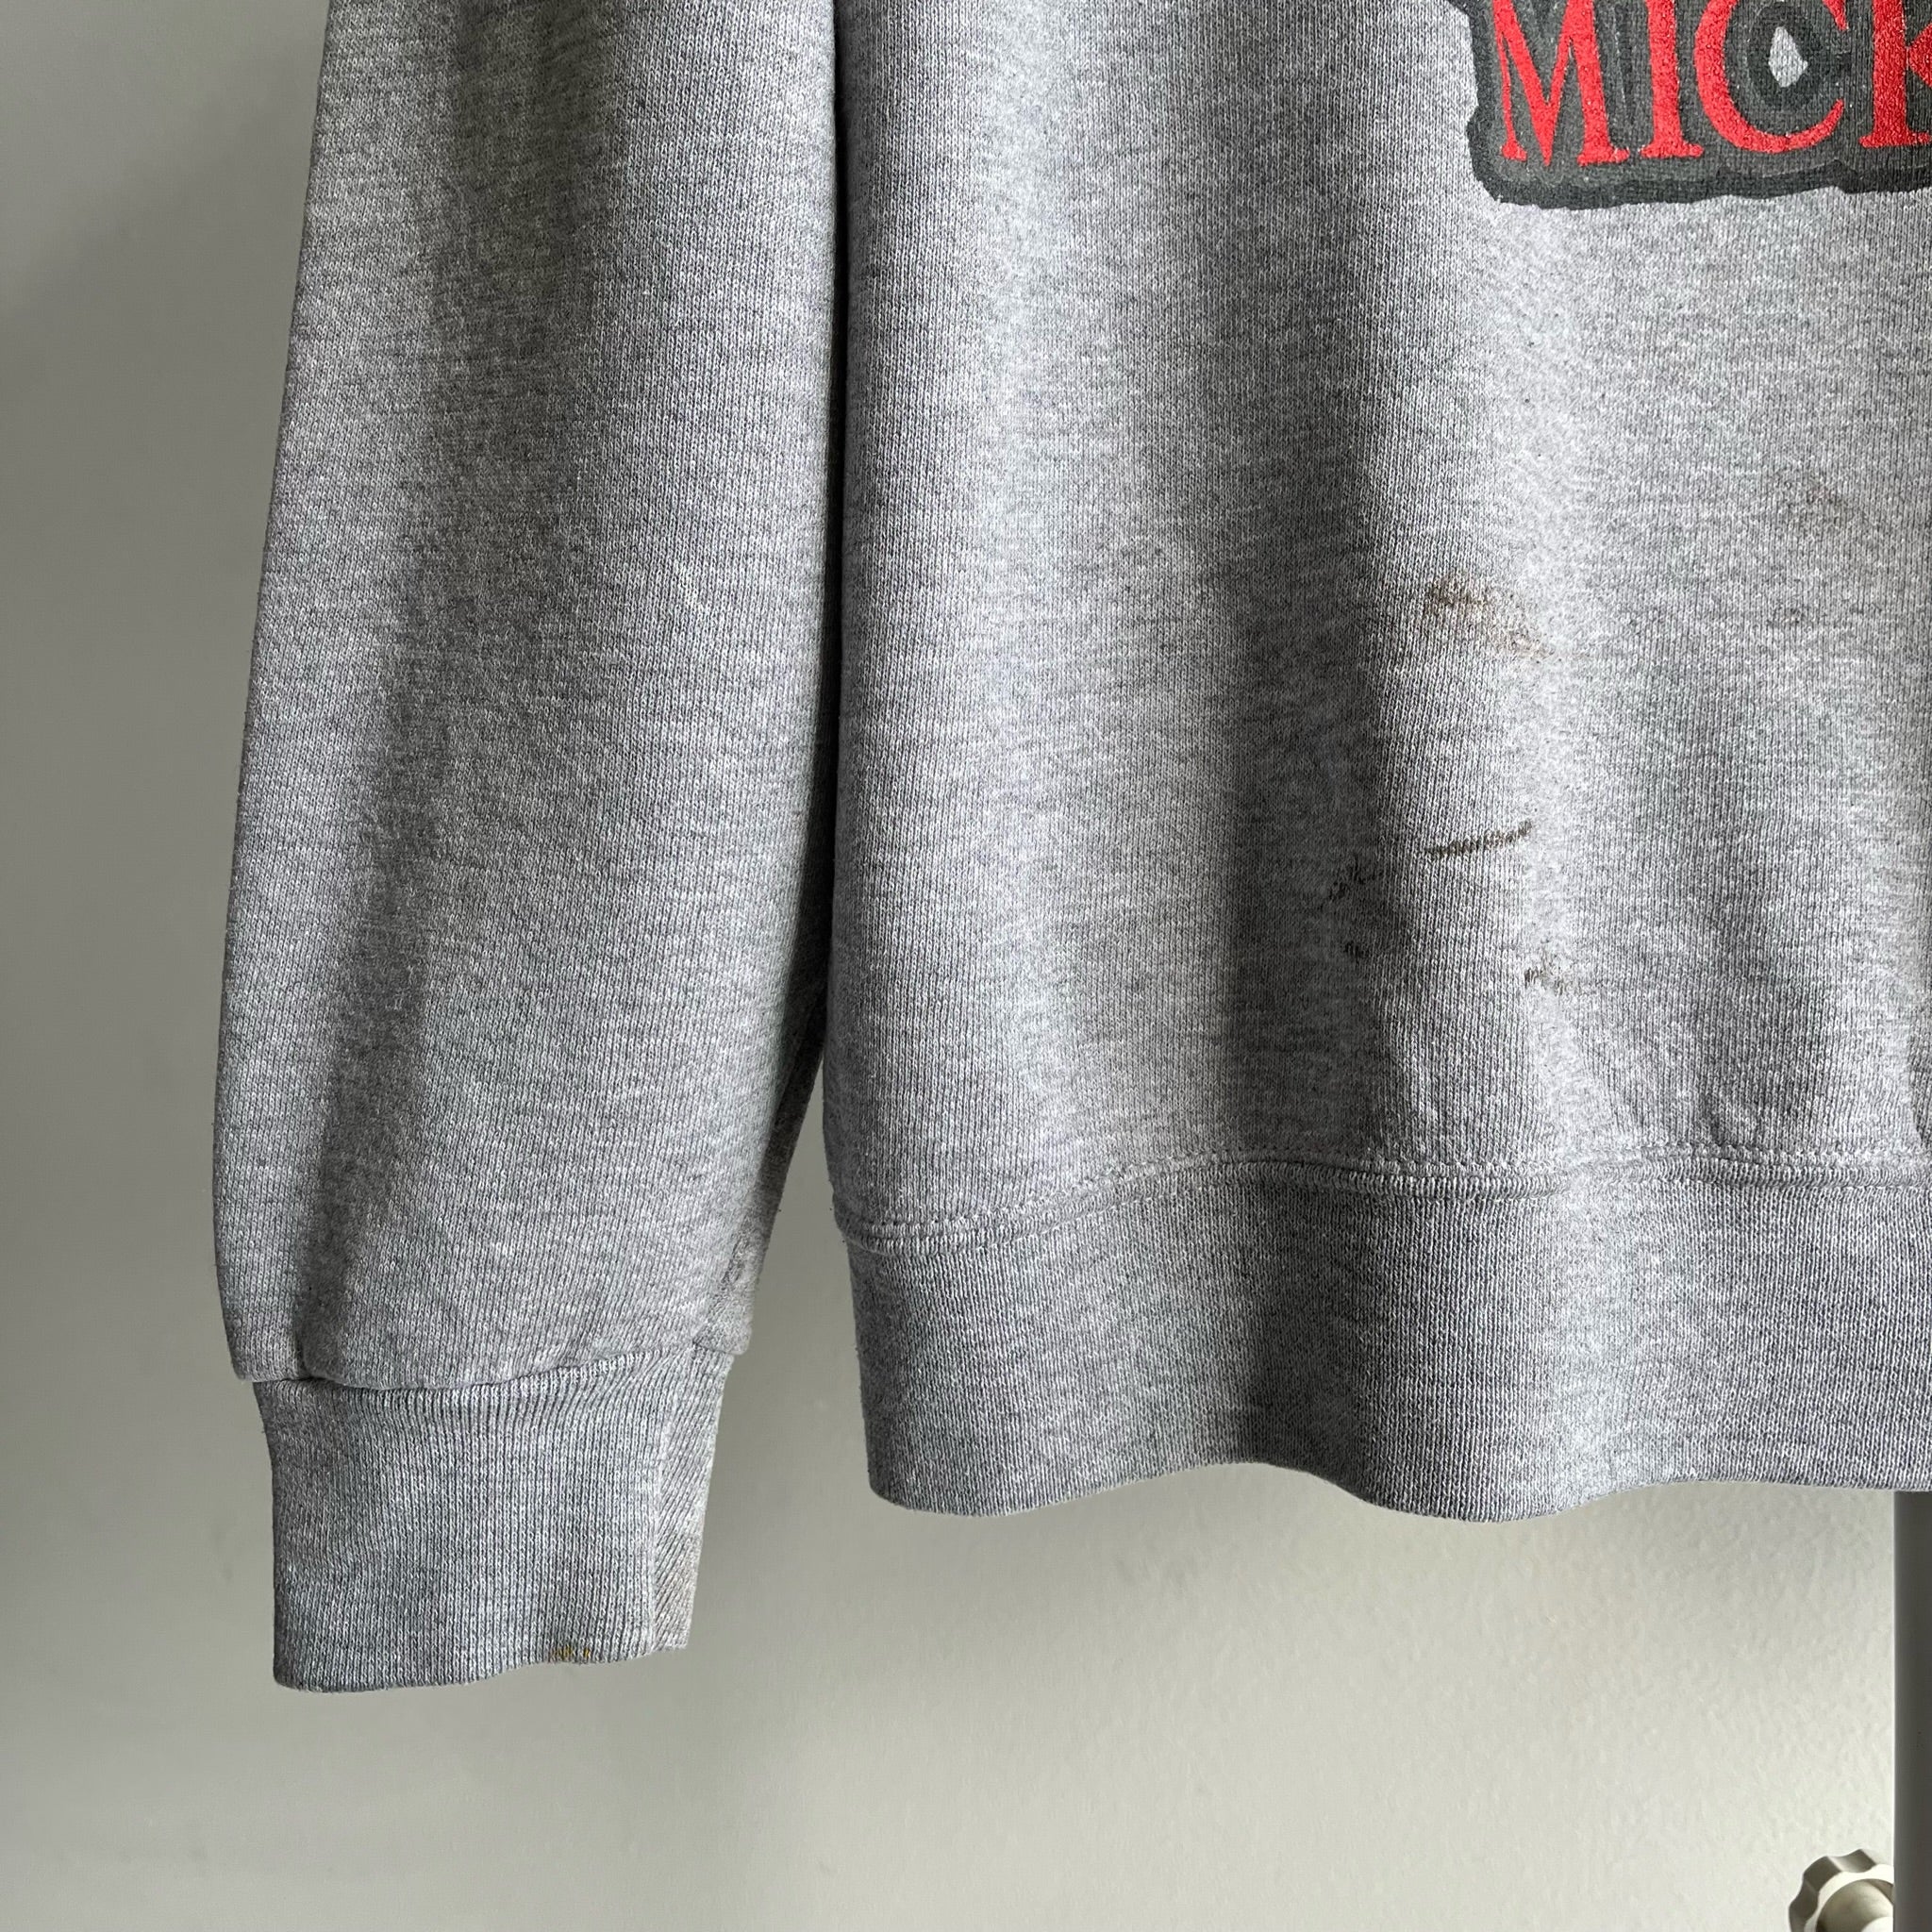 1990s Mickey Paint Stained Sweatshirt